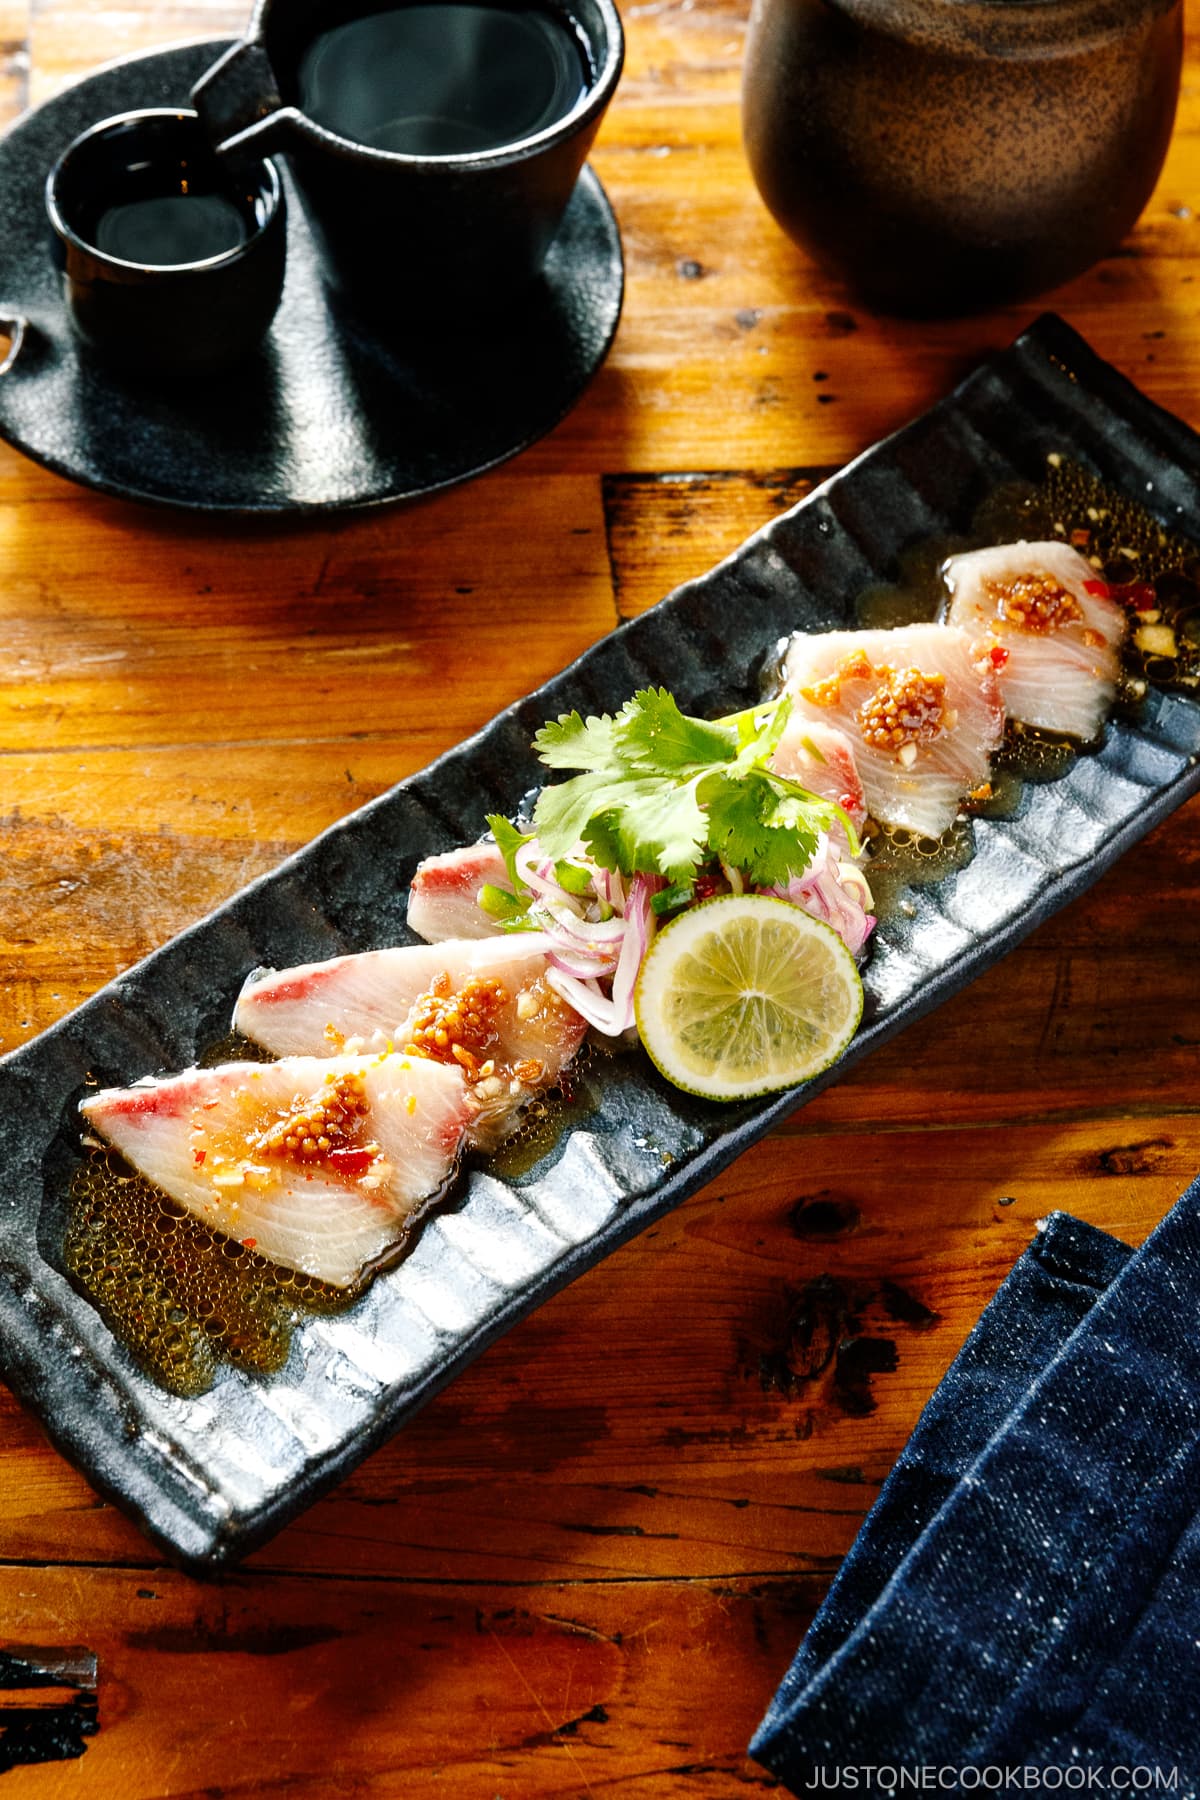 A black rectangular plate containing Hamachi Crudo garnished with mustard seeds, garlic chips, cilantro, and a slice of lime